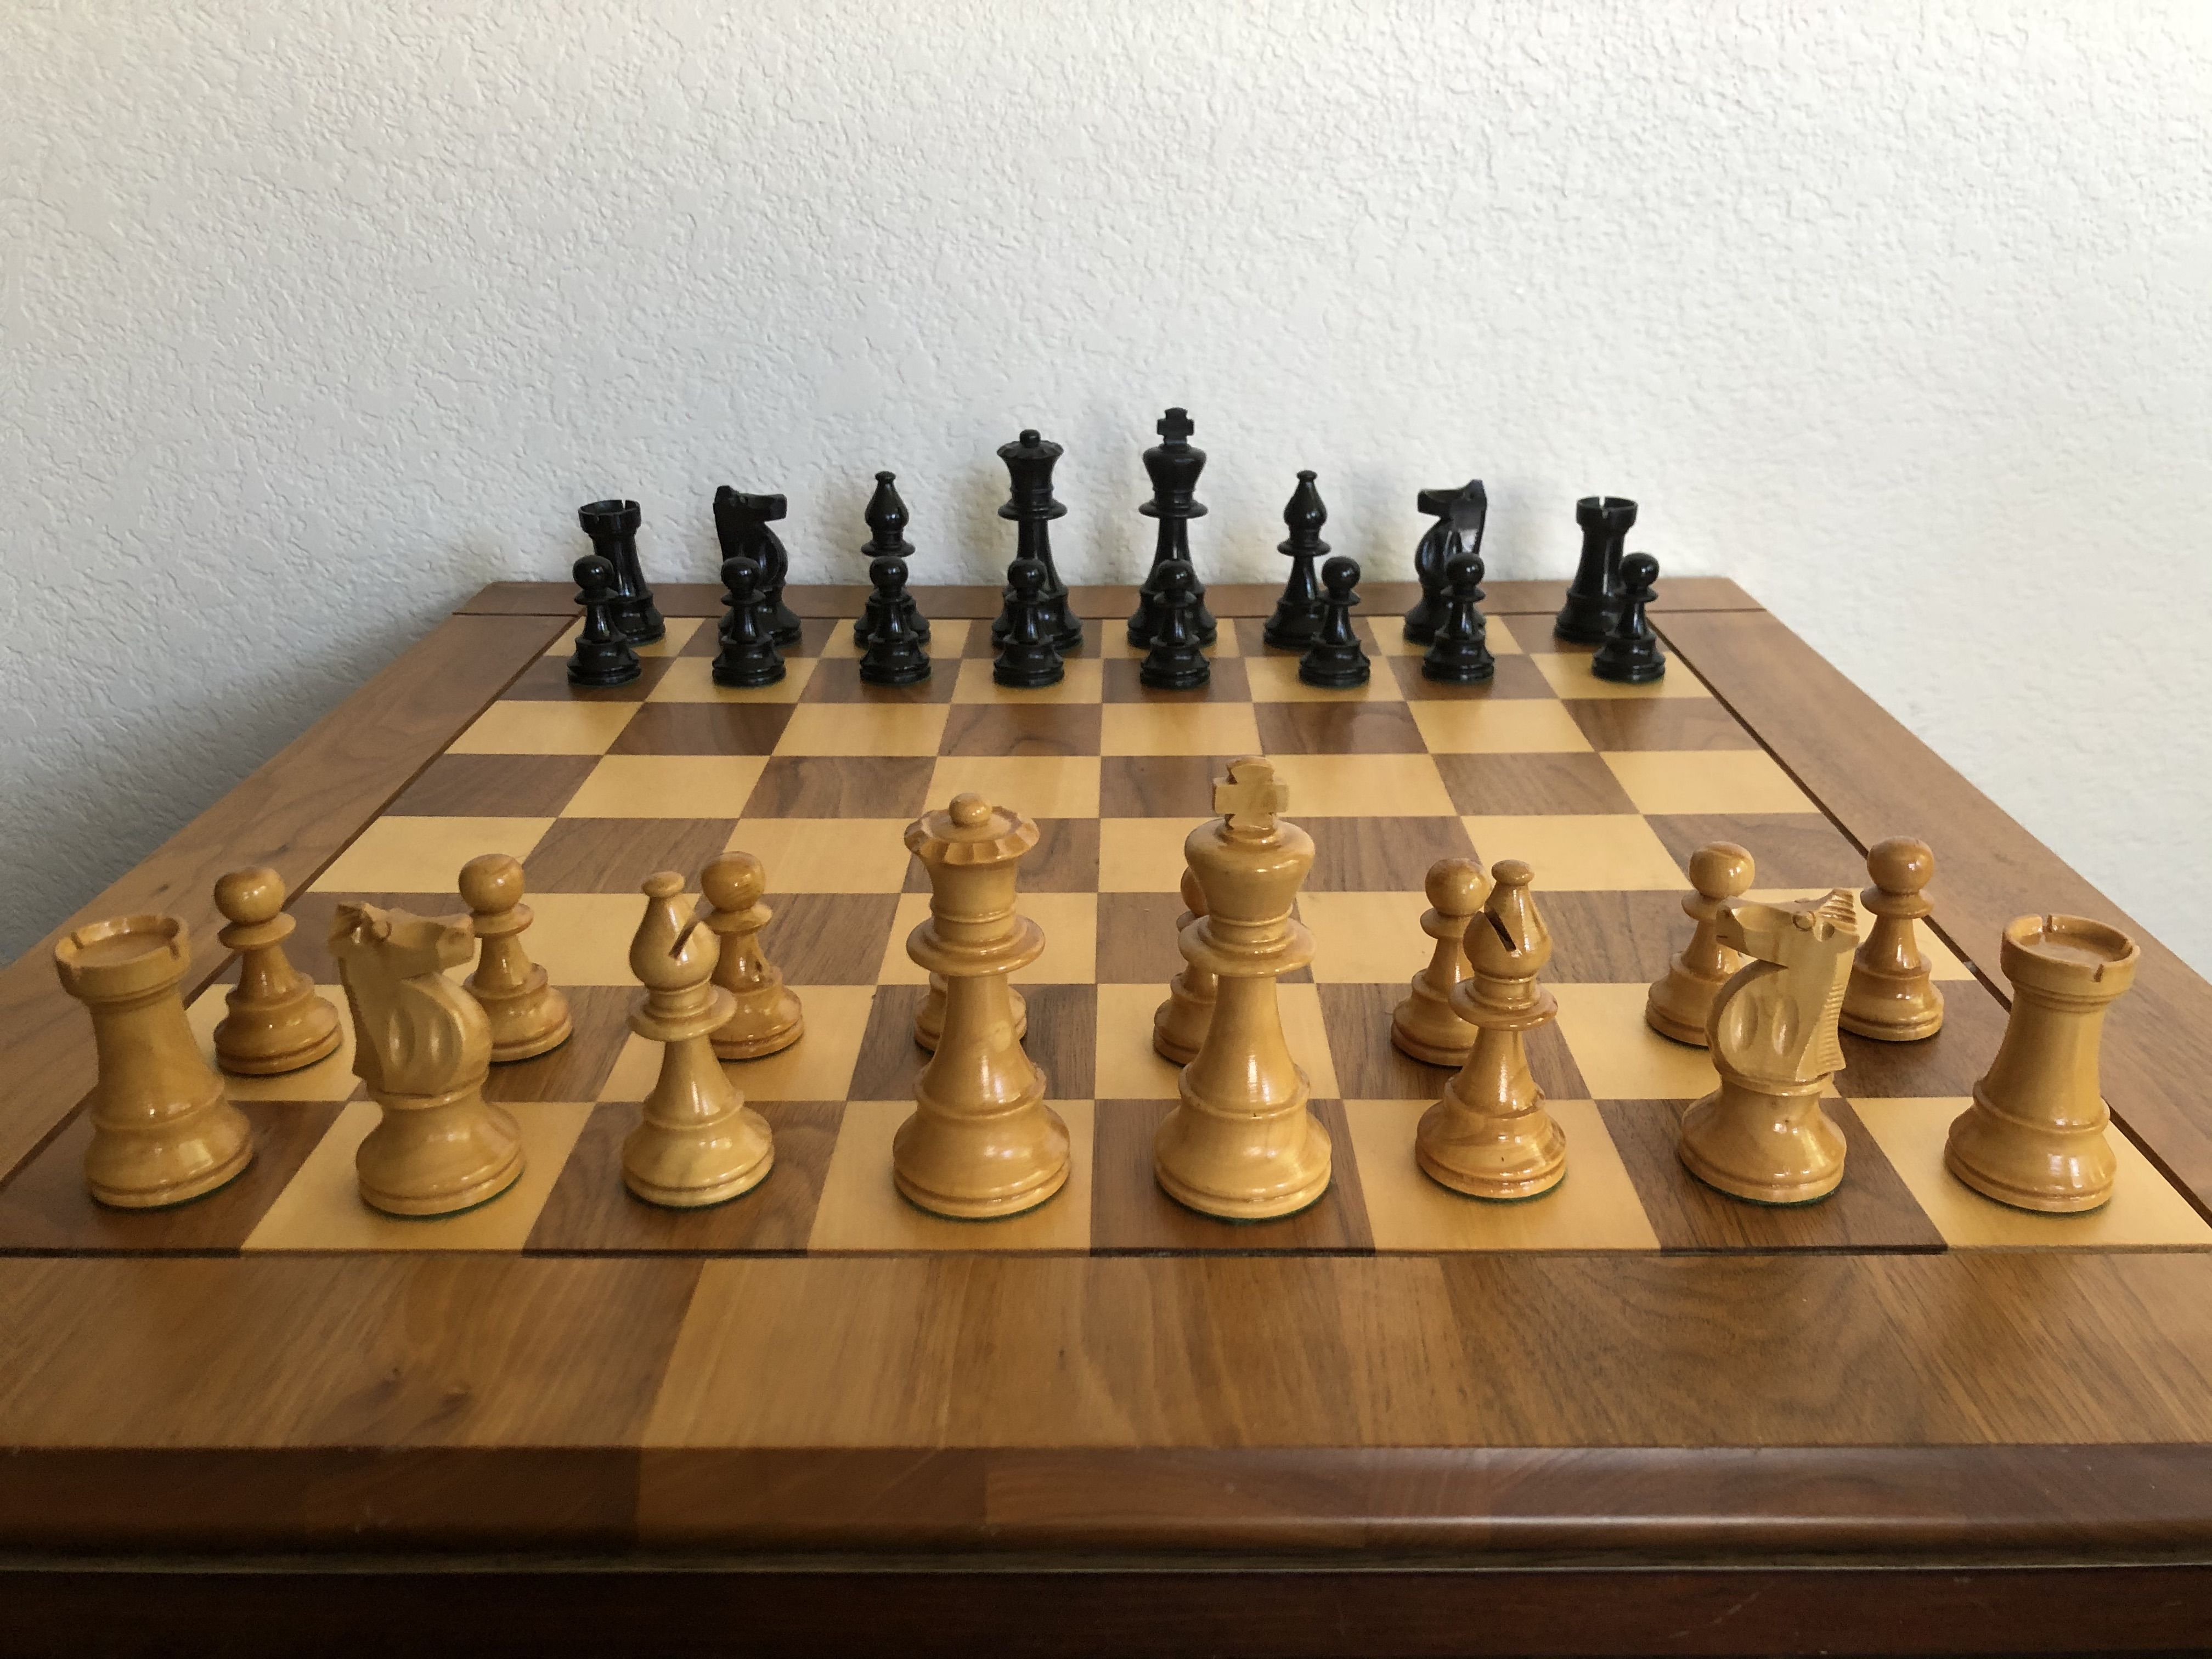 Historical Chess sets